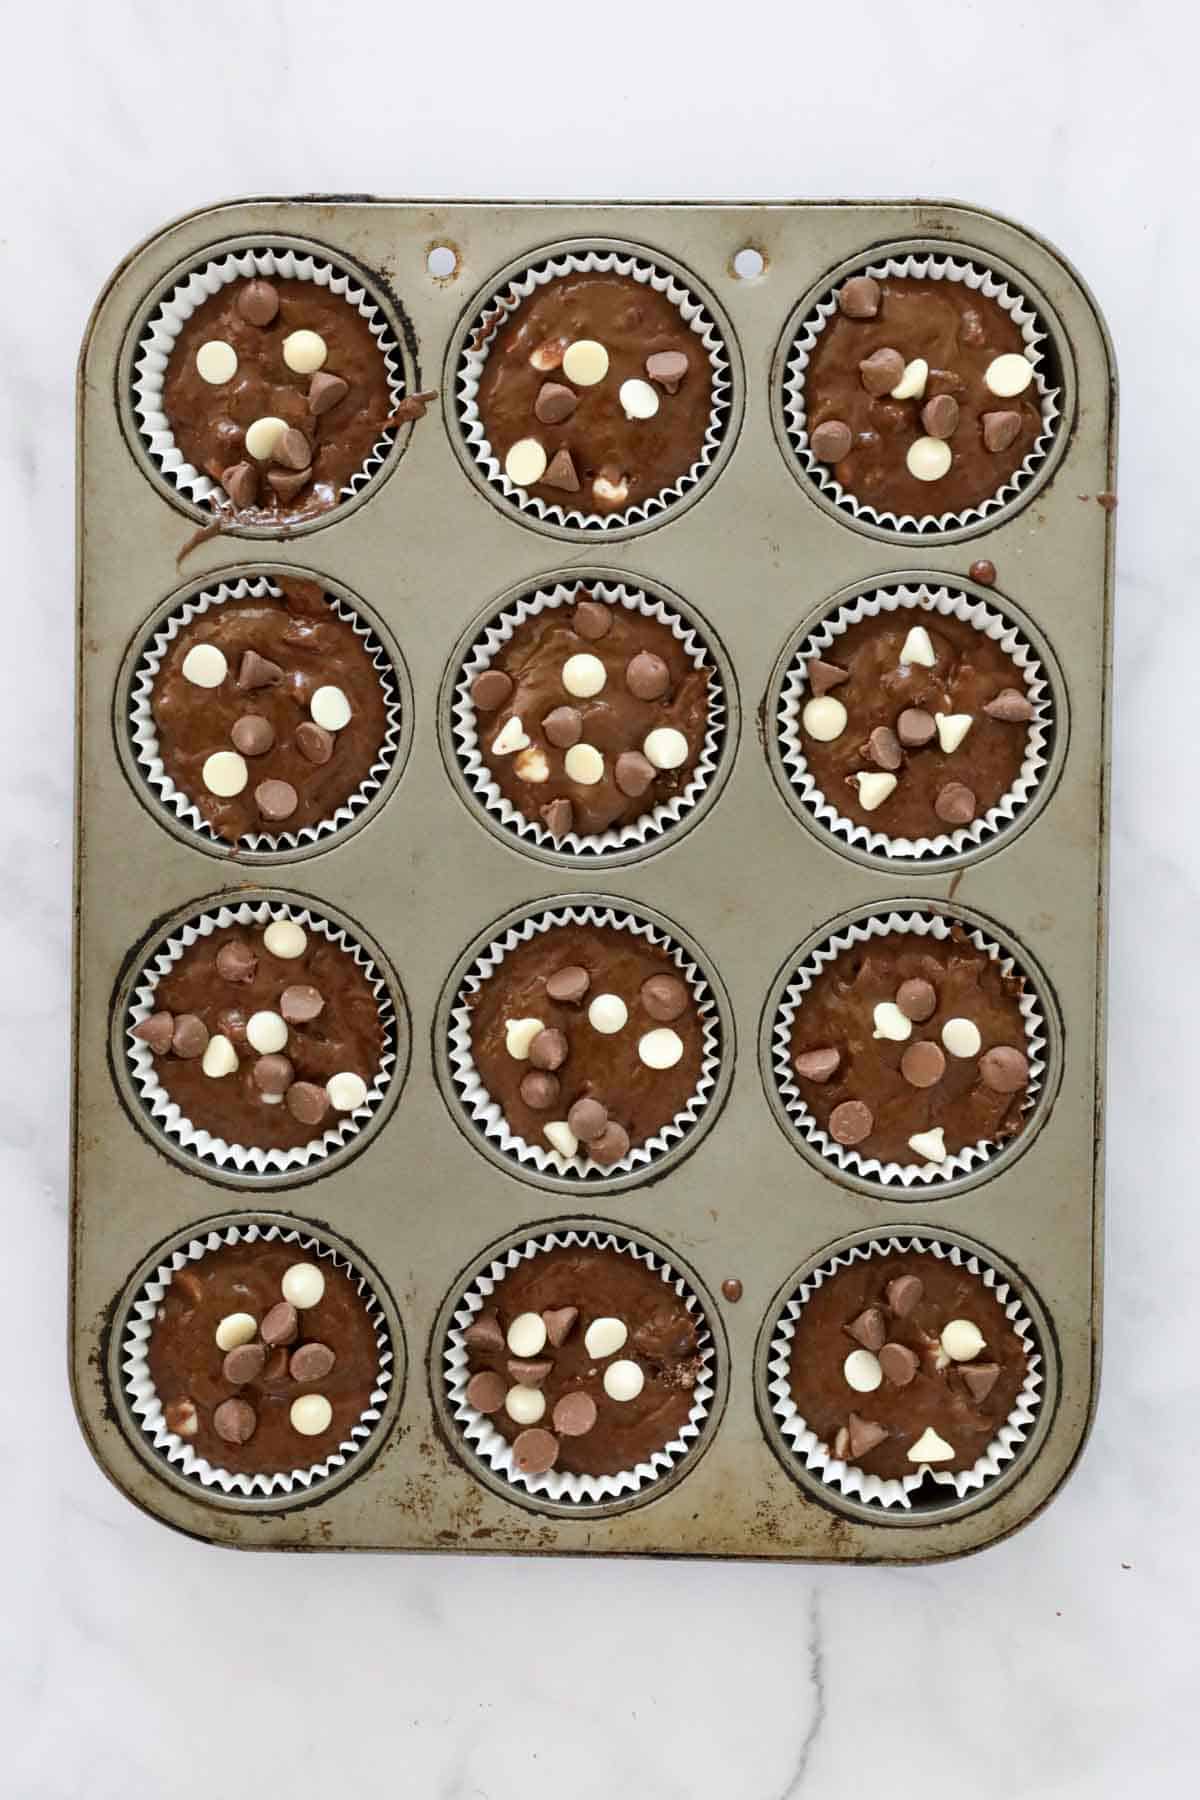 Muffin batter spooned into paper muffin cases. The batter sprinkled with extra milk and white chocolate chips.